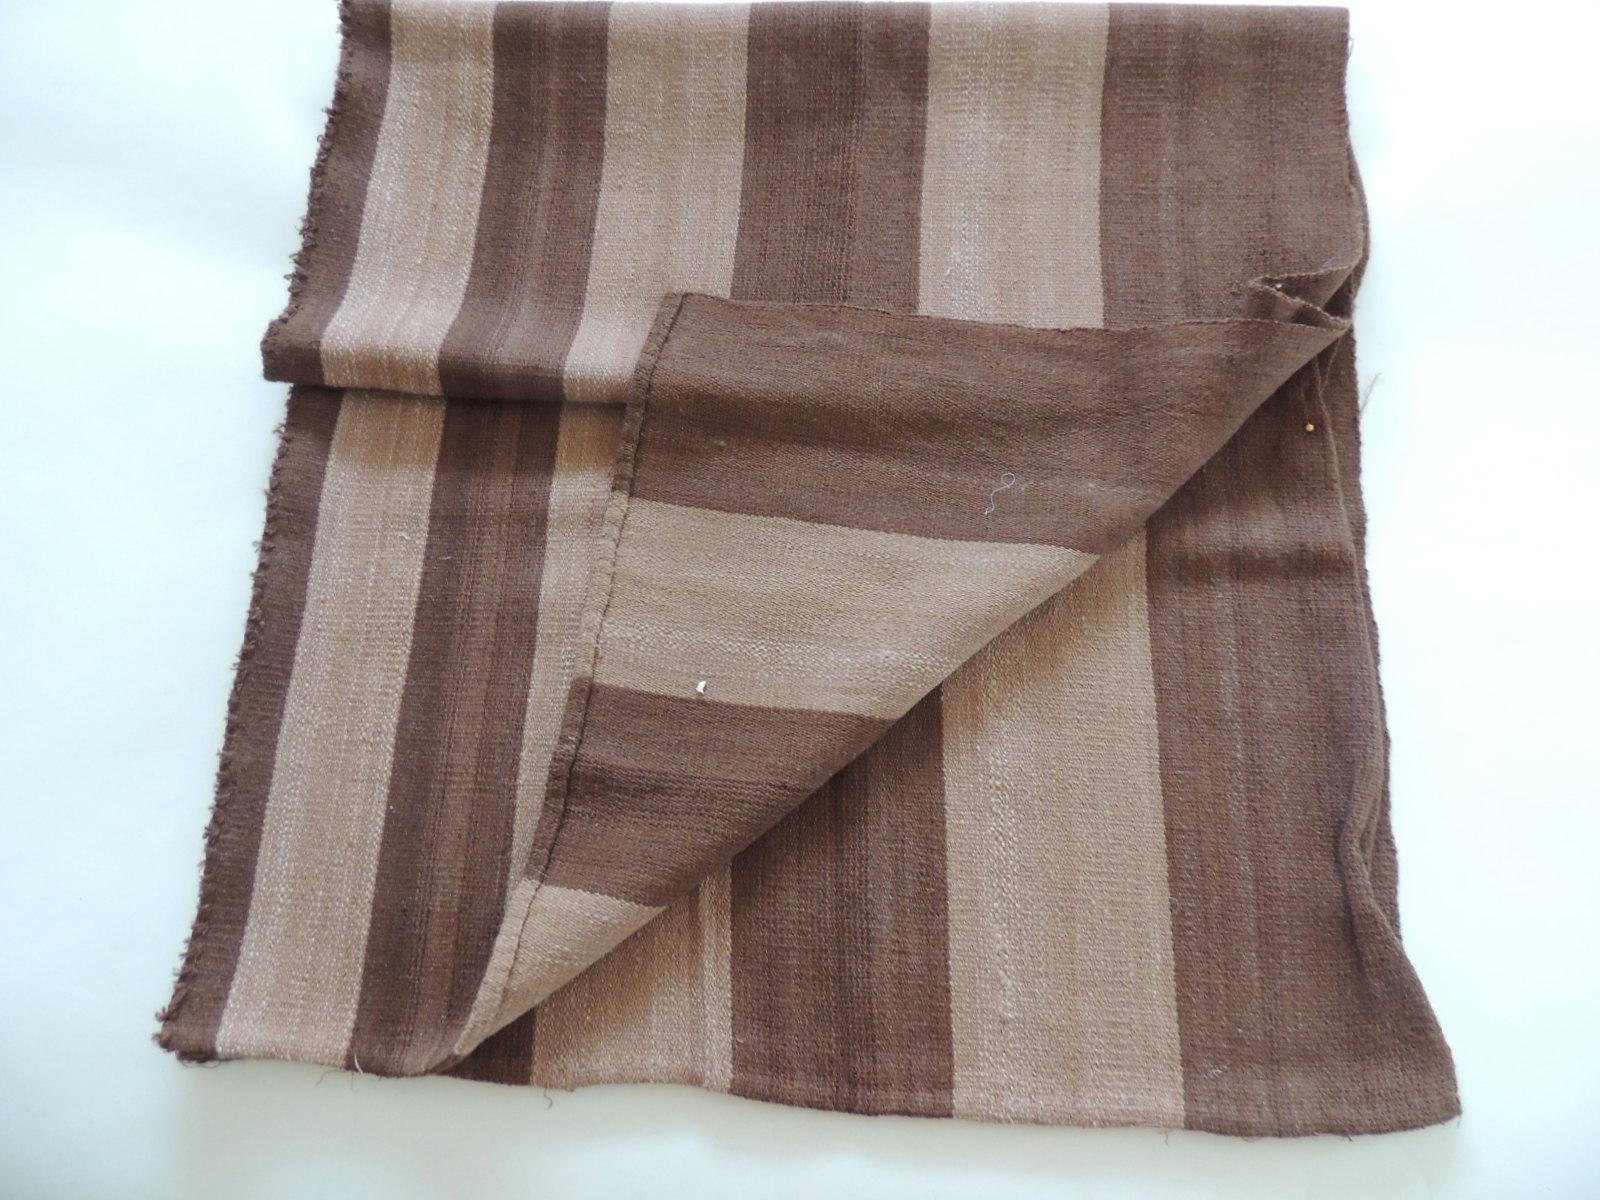 Vintage brown and camel woven textile.
Was a throw and was cut up, ideal for
pillows or upholstery.
Size: 24